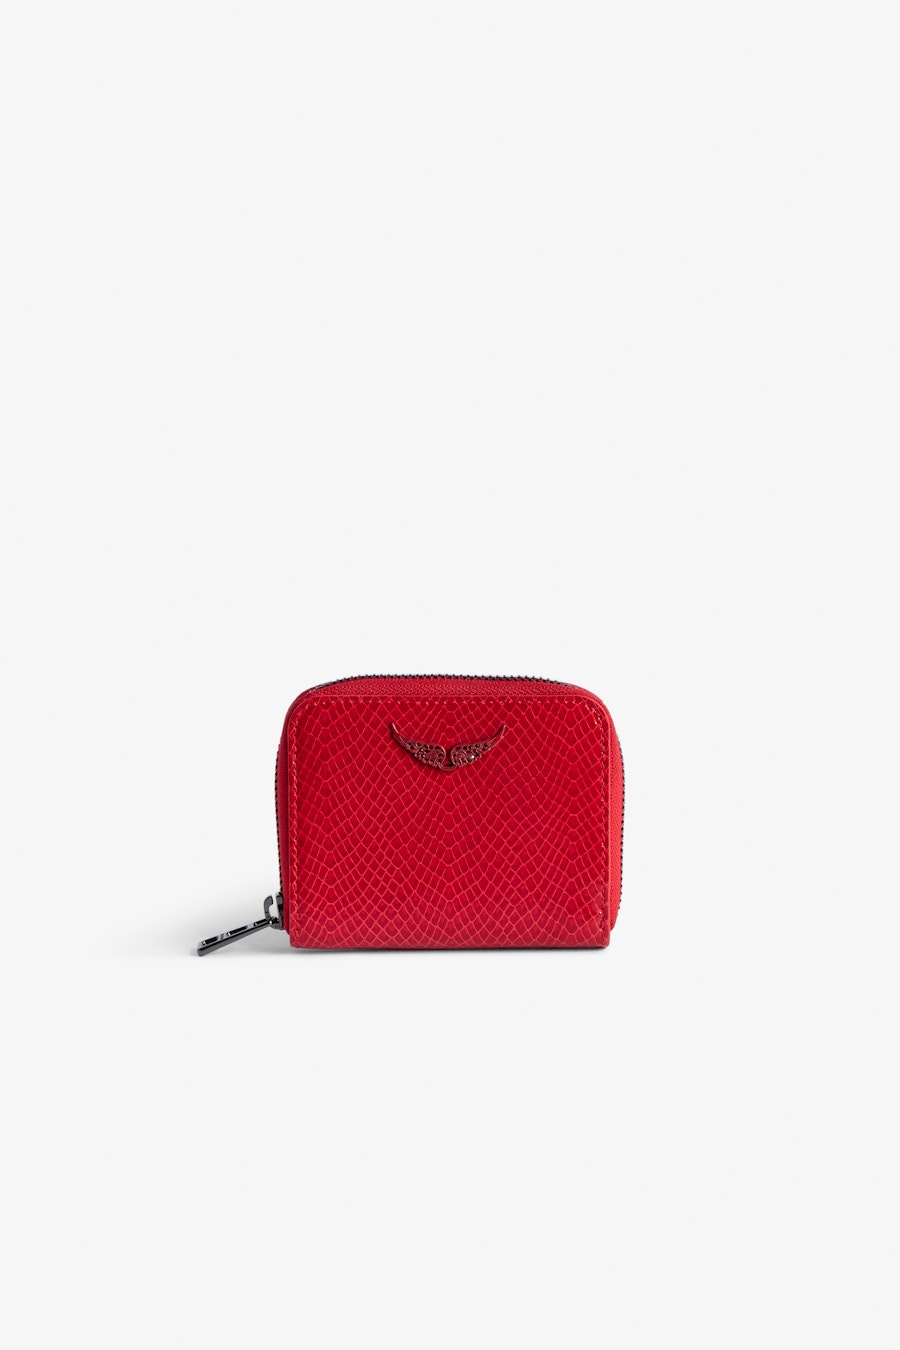 ZADIG&VOLTAIRE Mini ZV Embossed Coin Purse